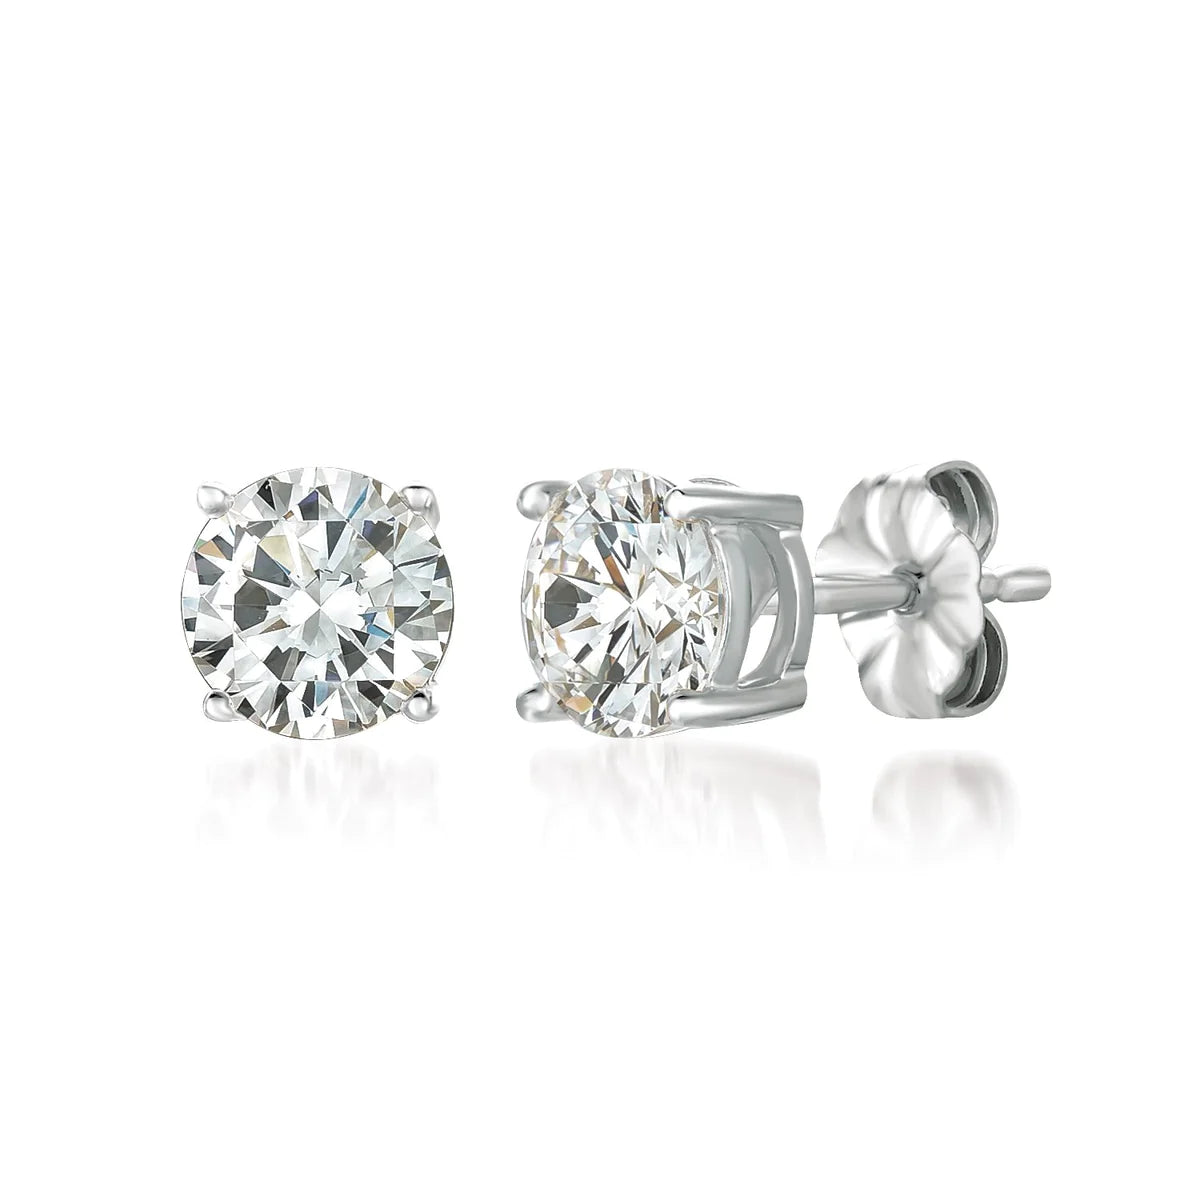 Stud Earrings Finished in Pure Platinum